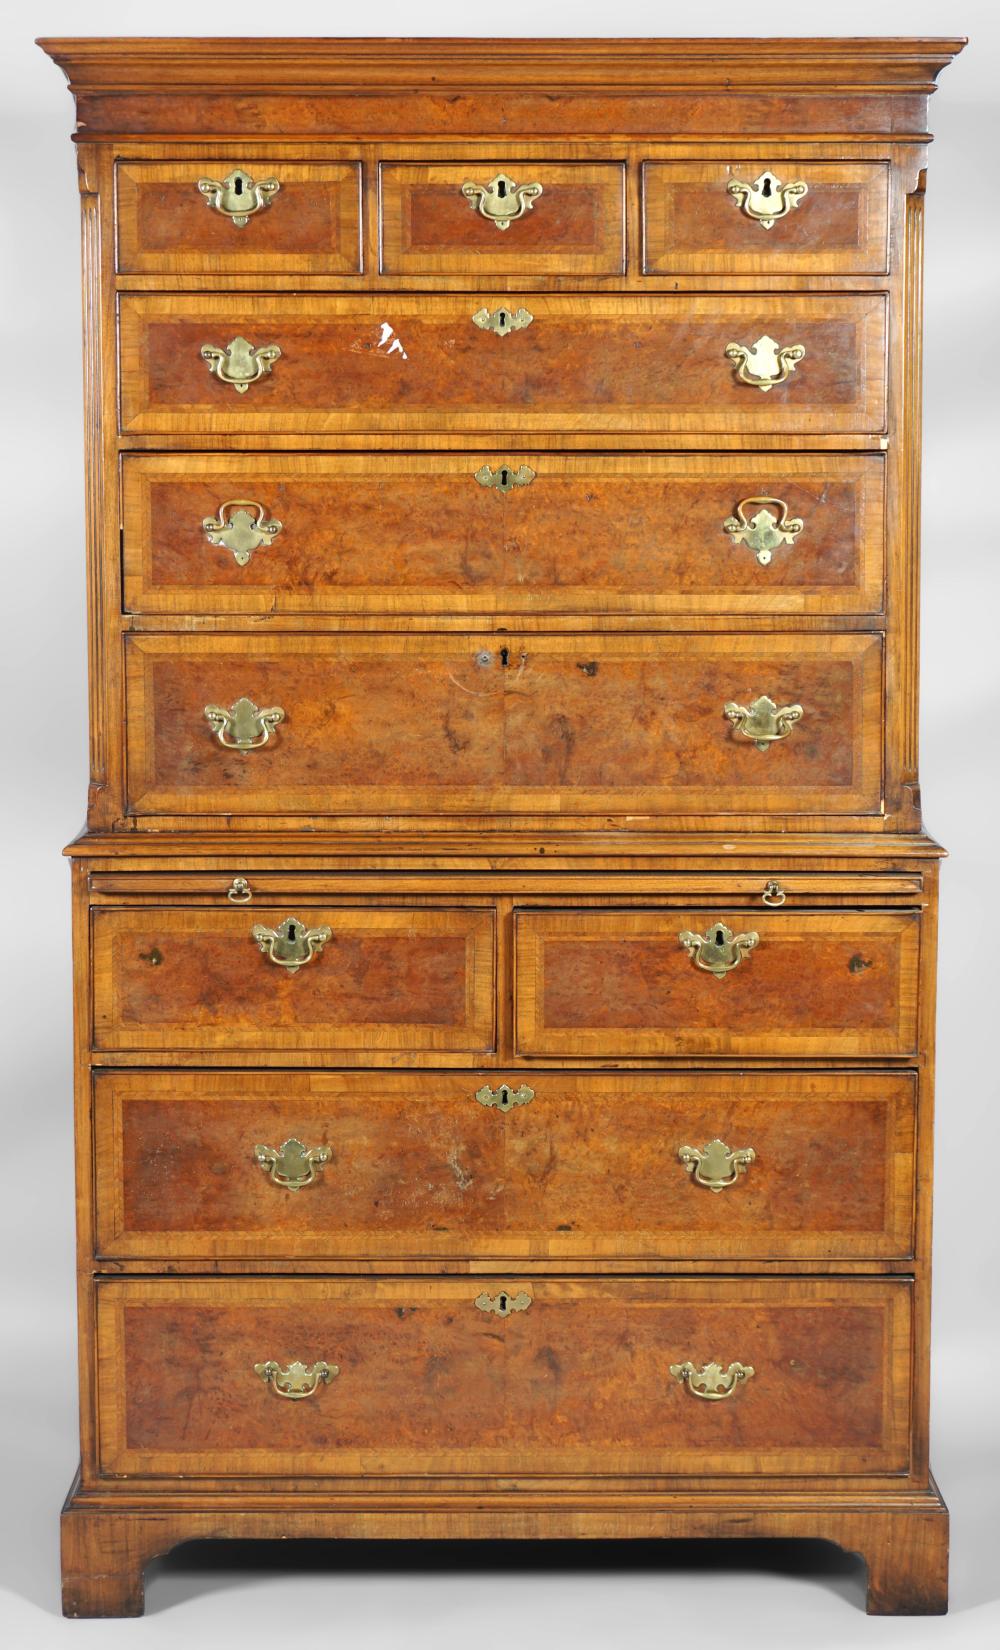 GEORGE III STYLE WALNUT CHEST ON 33cce1